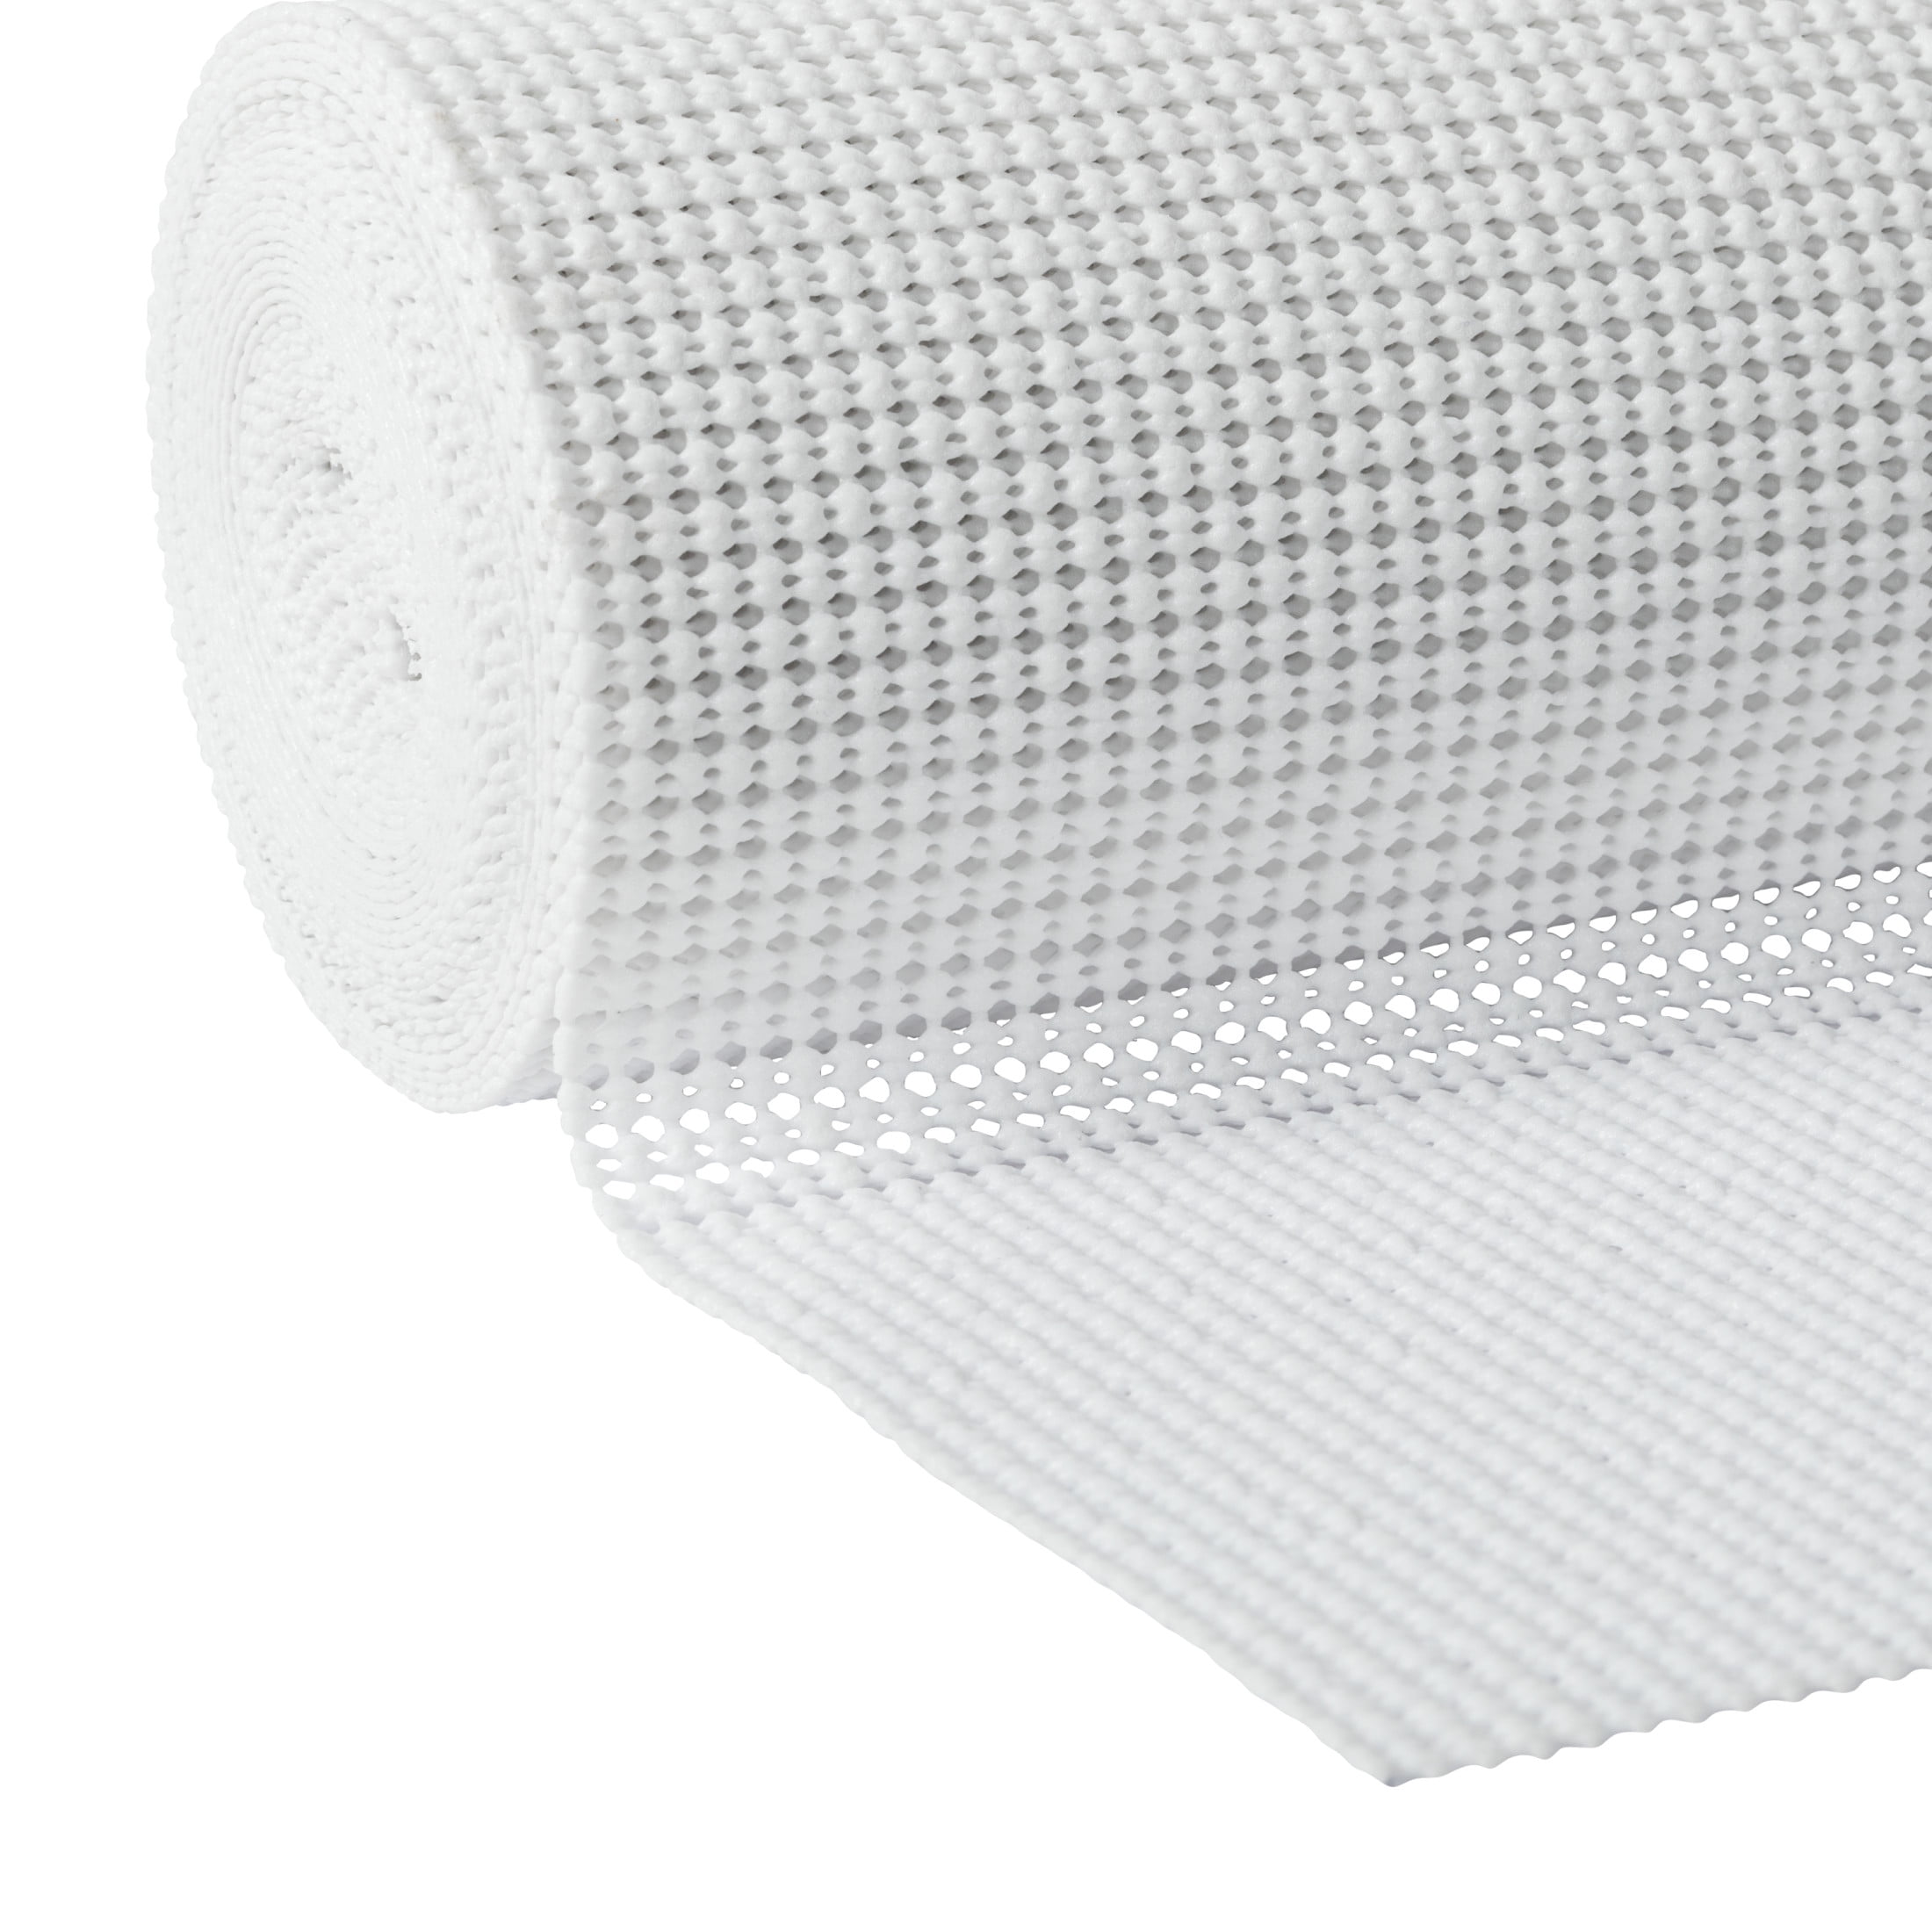 Grip-N-Stick Self-Adhesive Shelf Liner - White, 18 in x 4 ft - Foods Co.